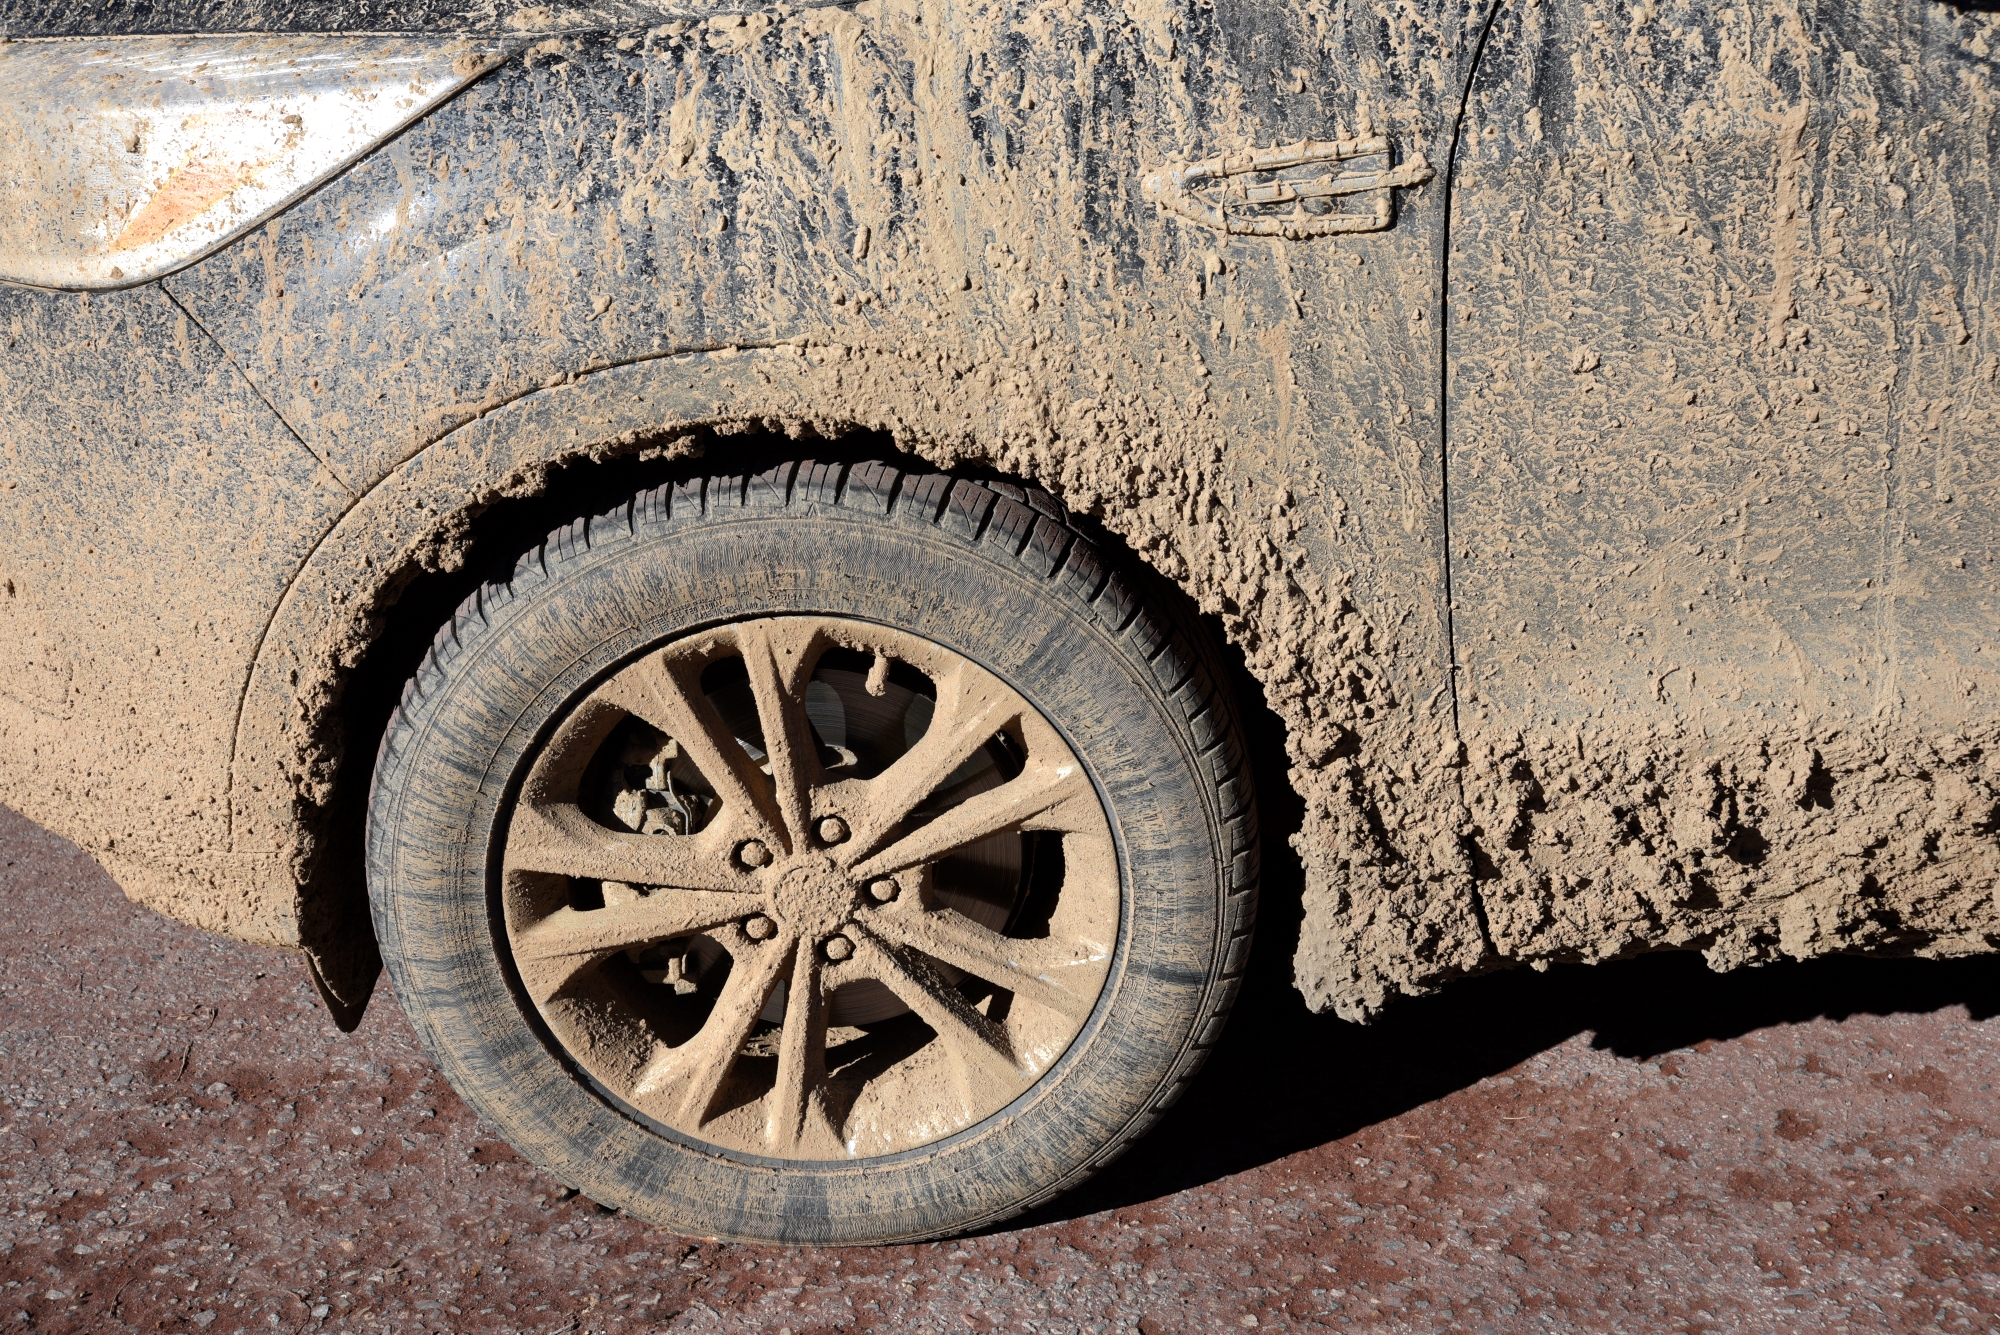 Mud is caked on the side of a car ready for detailing.